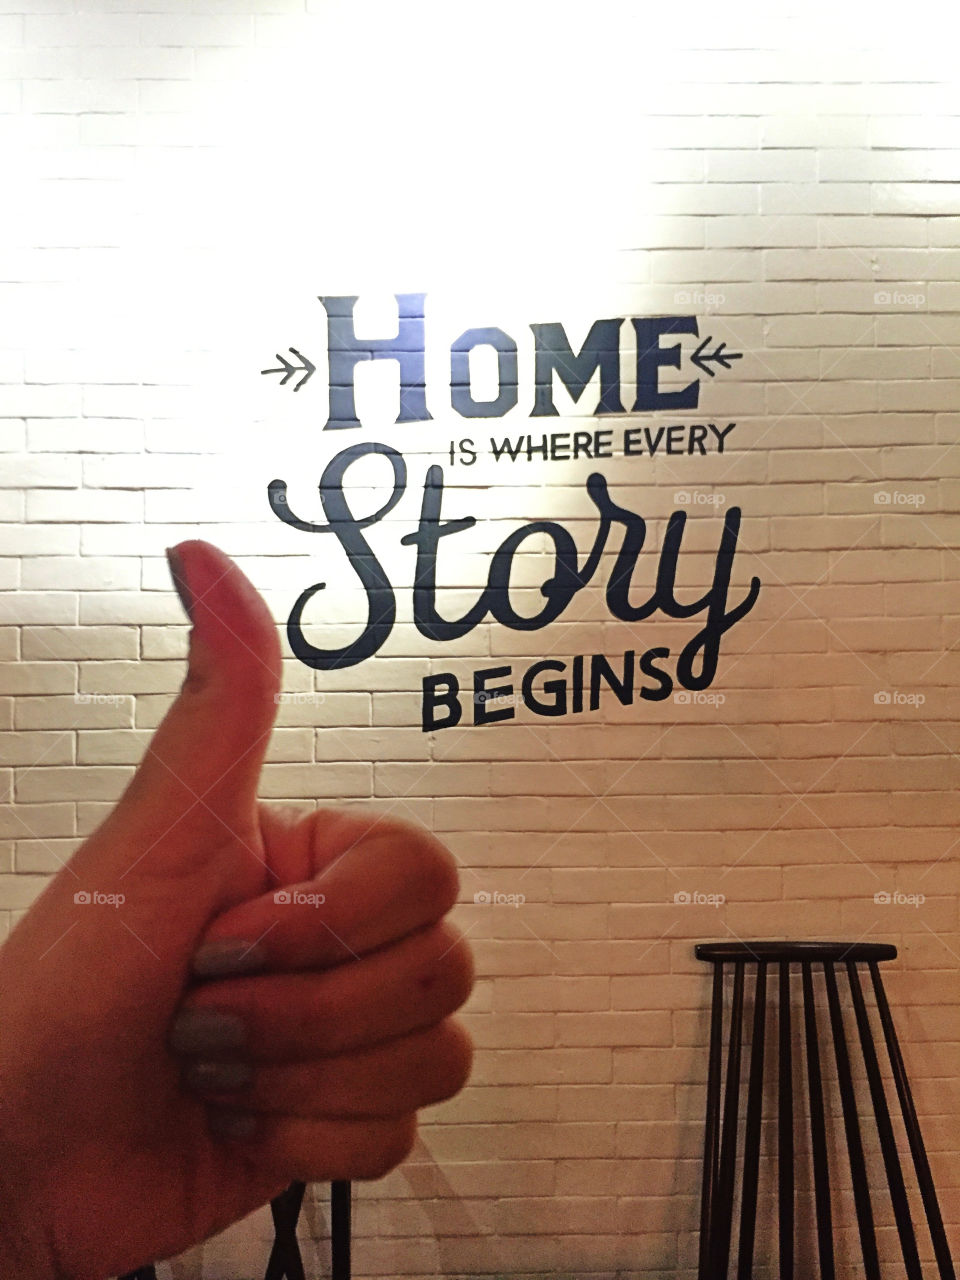 Home is where every story begins